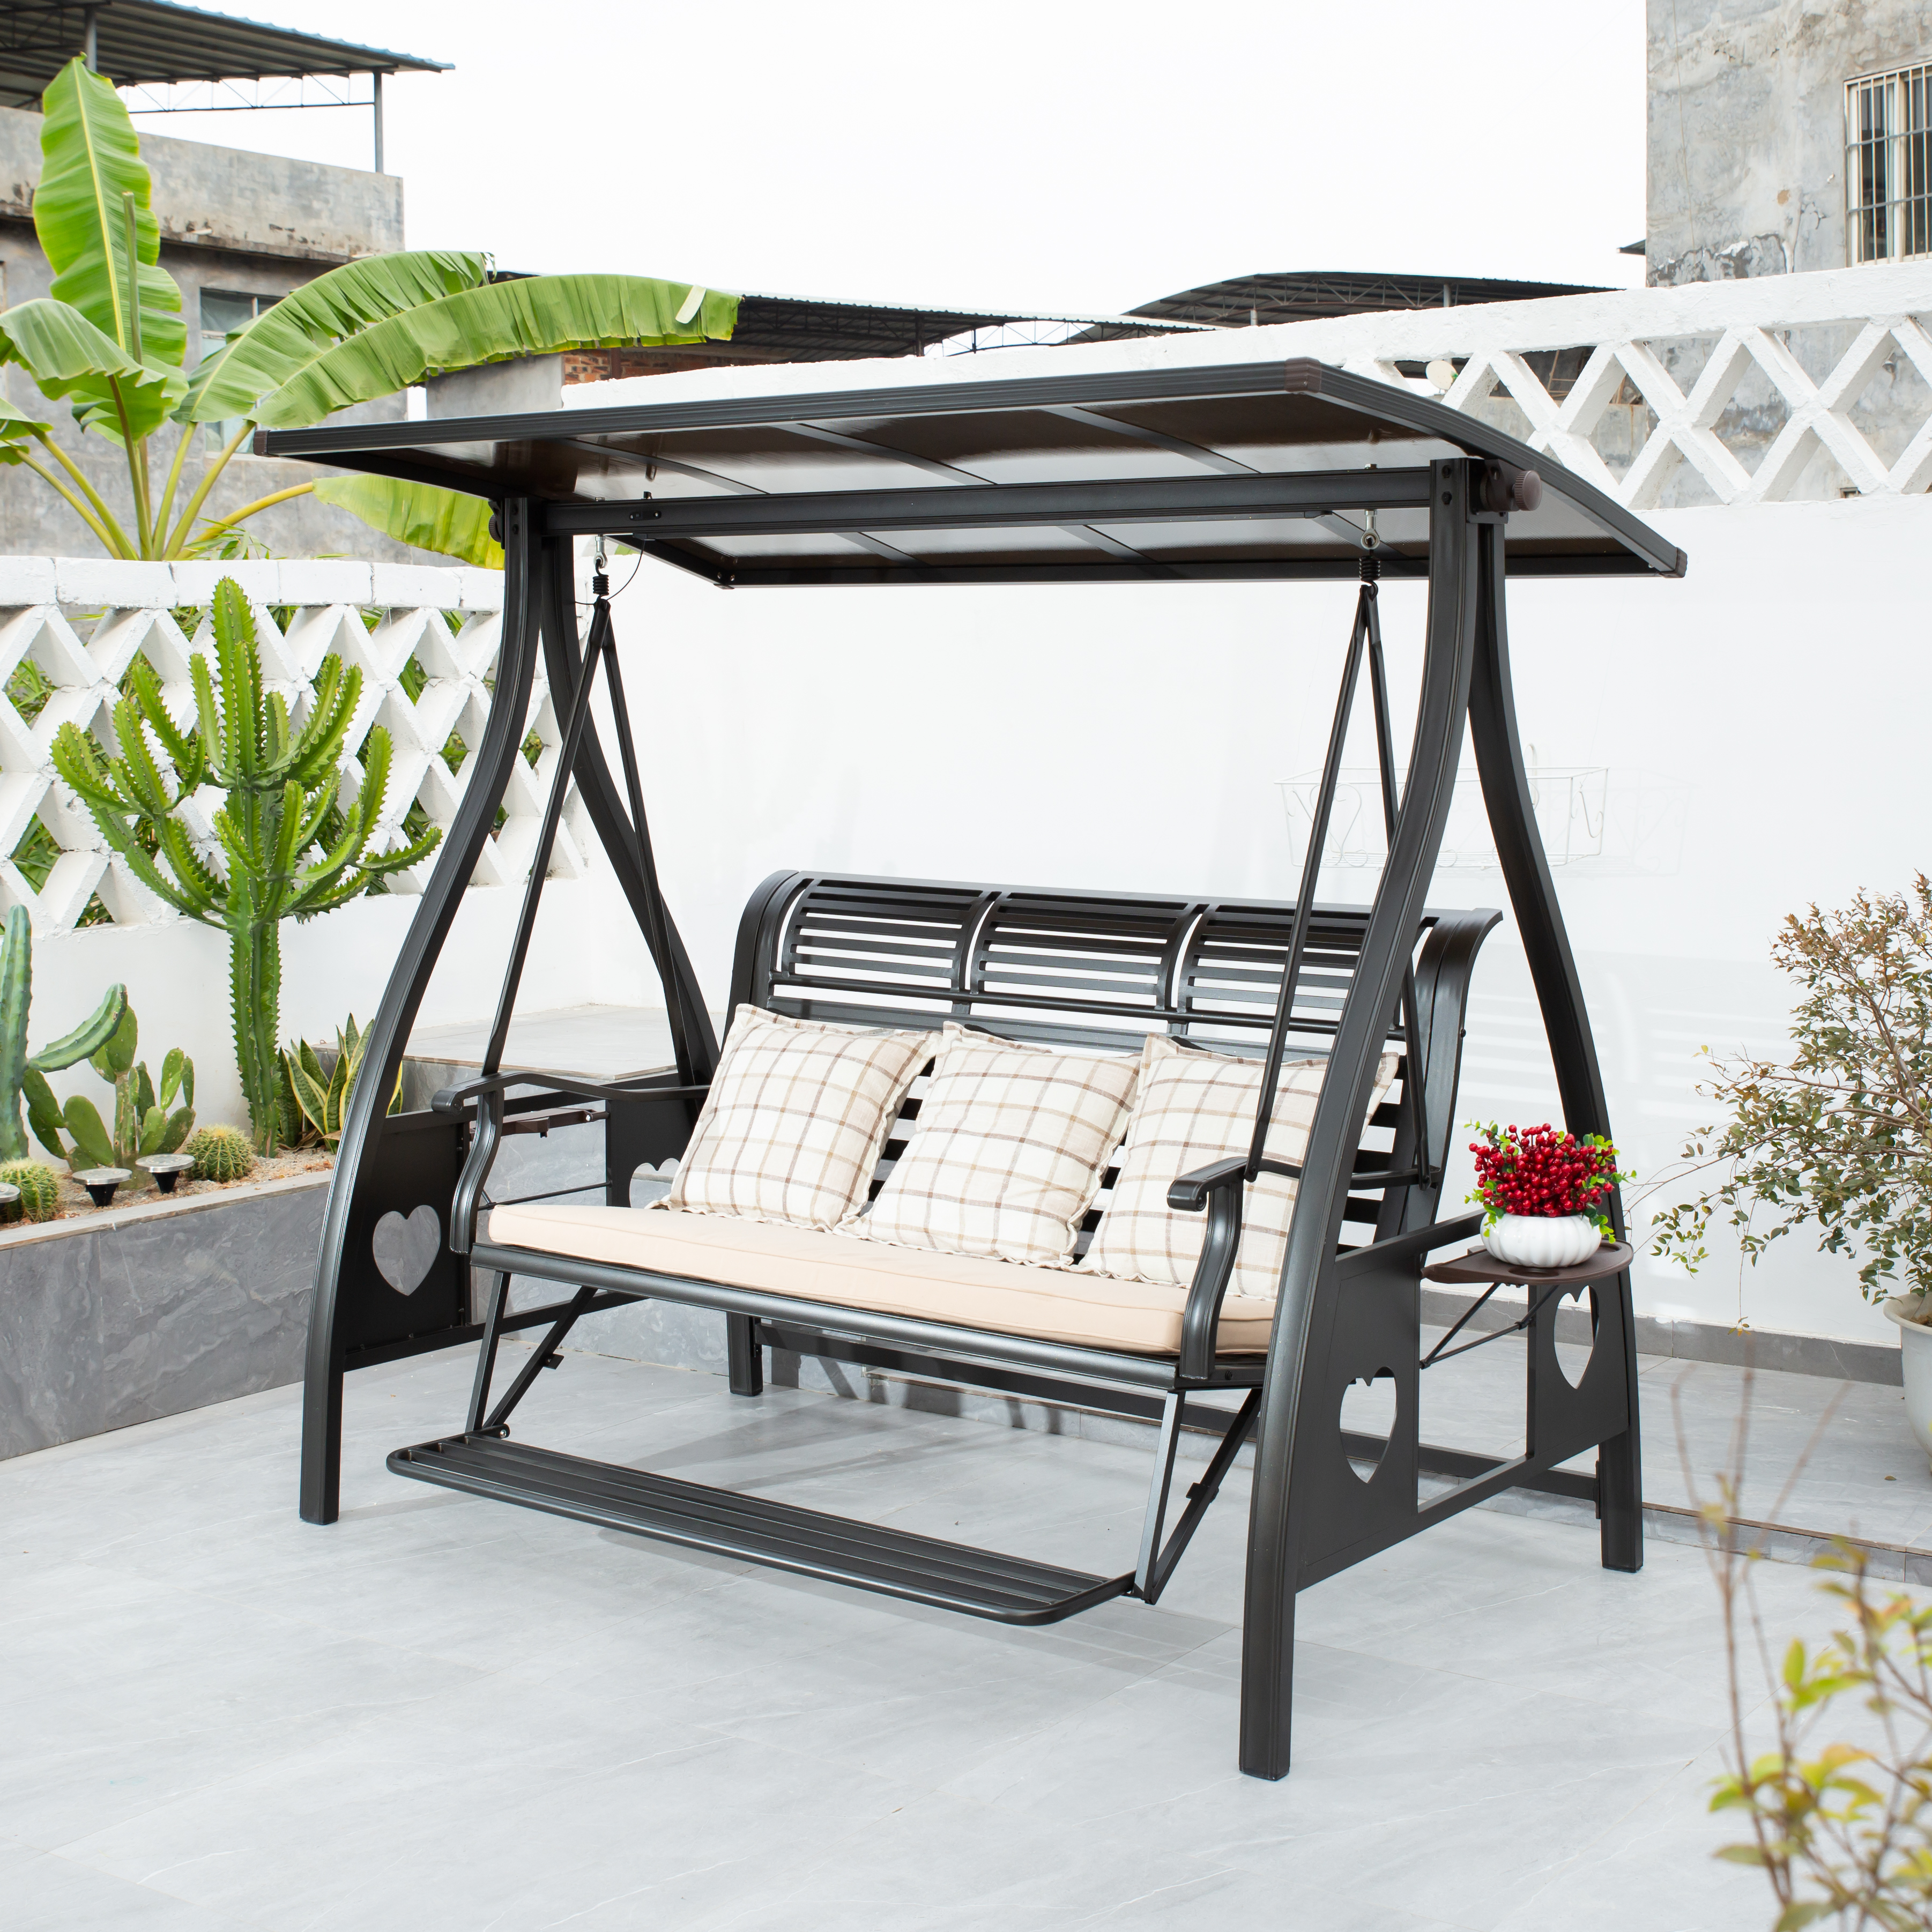 Garden Three Seat Swing Chair with Canopy